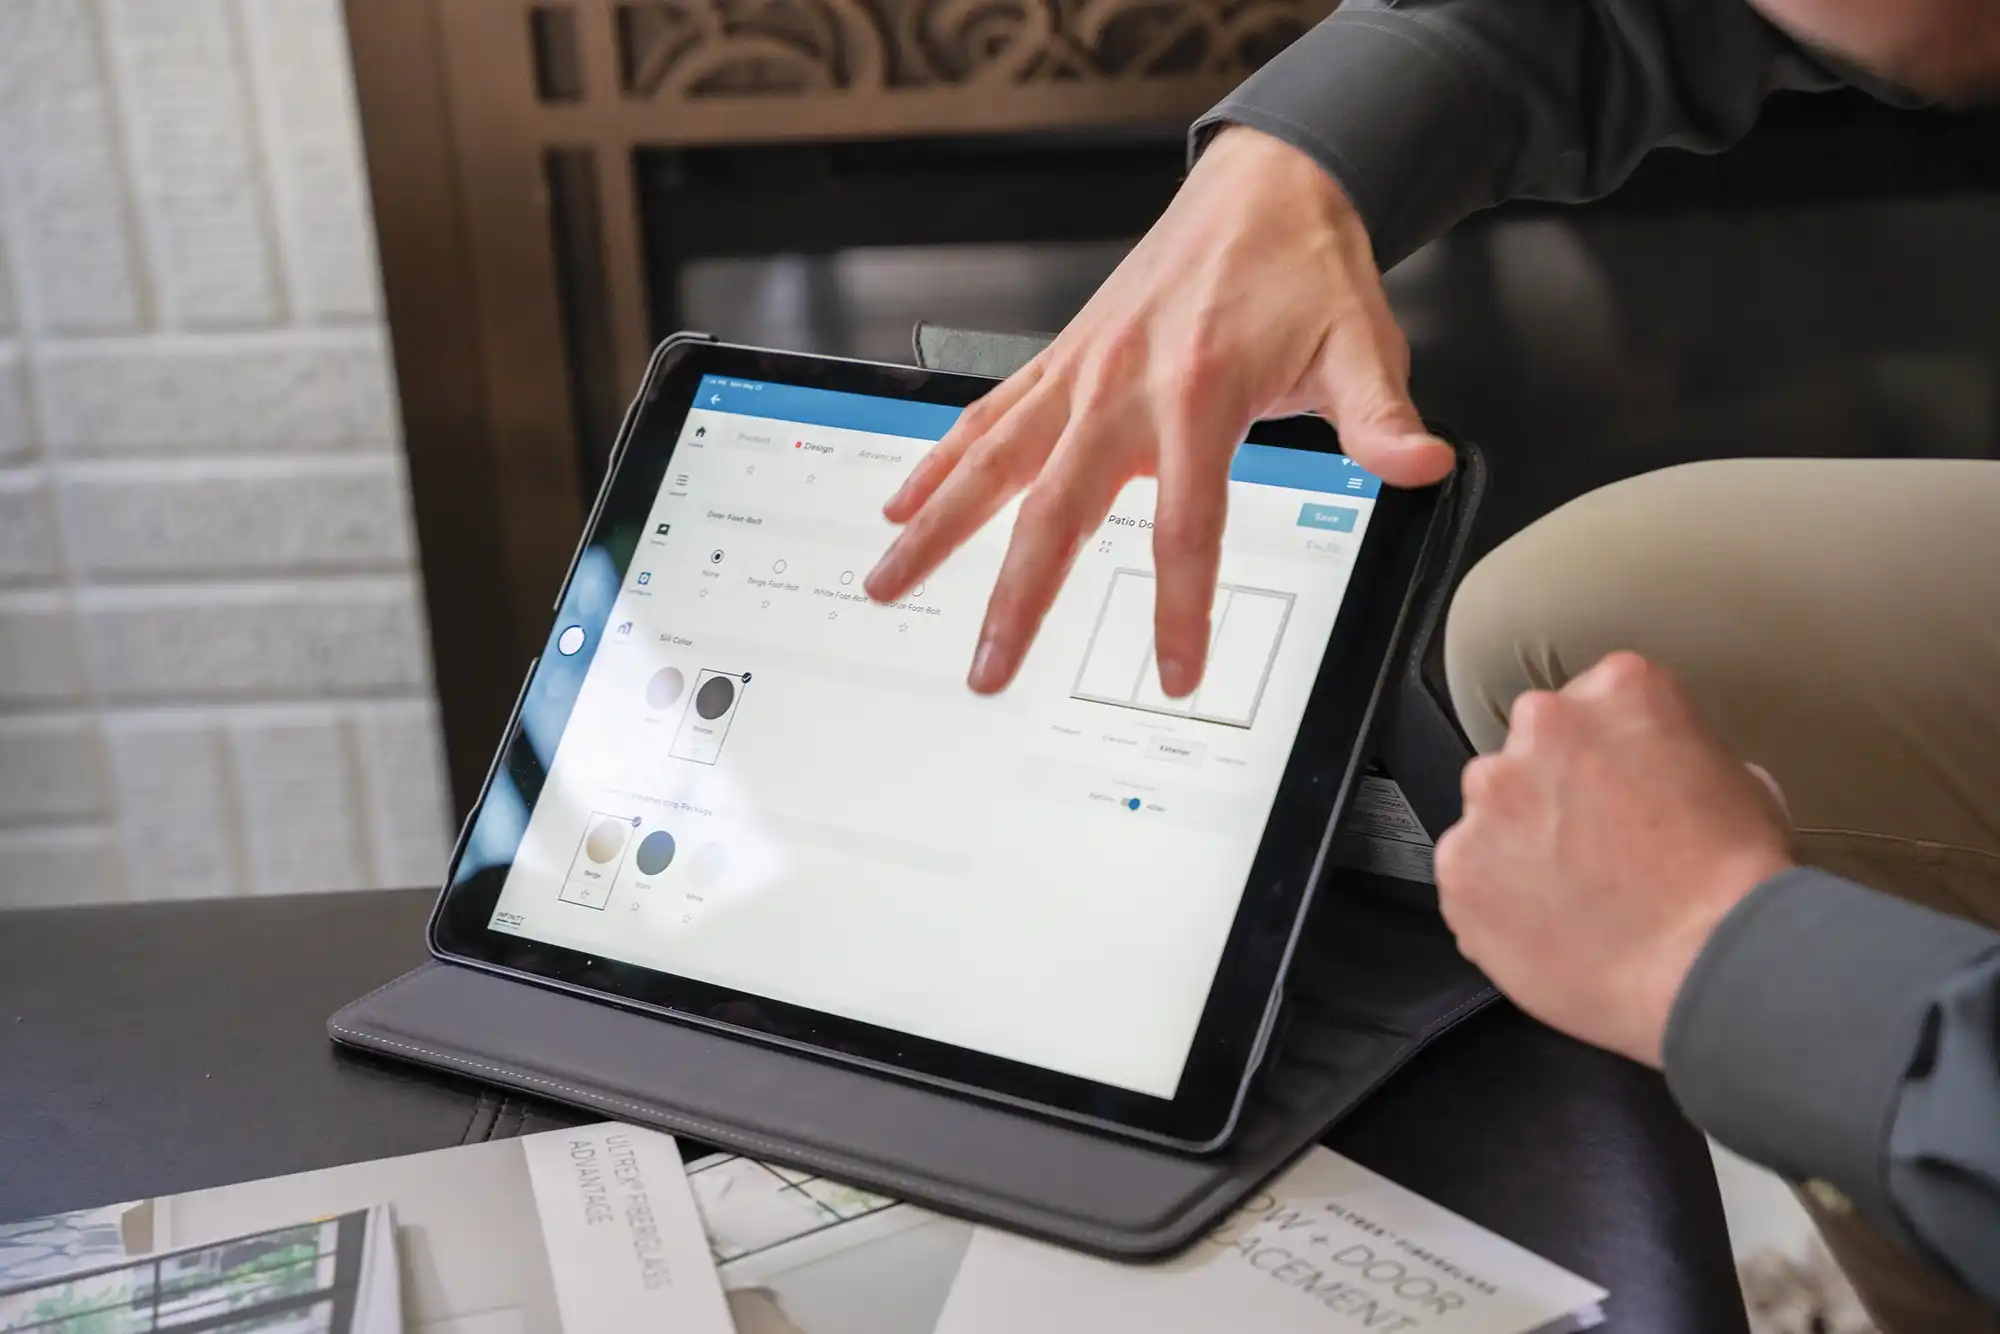 A Marvin Replacement design consultant points to options on a tablet computer inside a home.